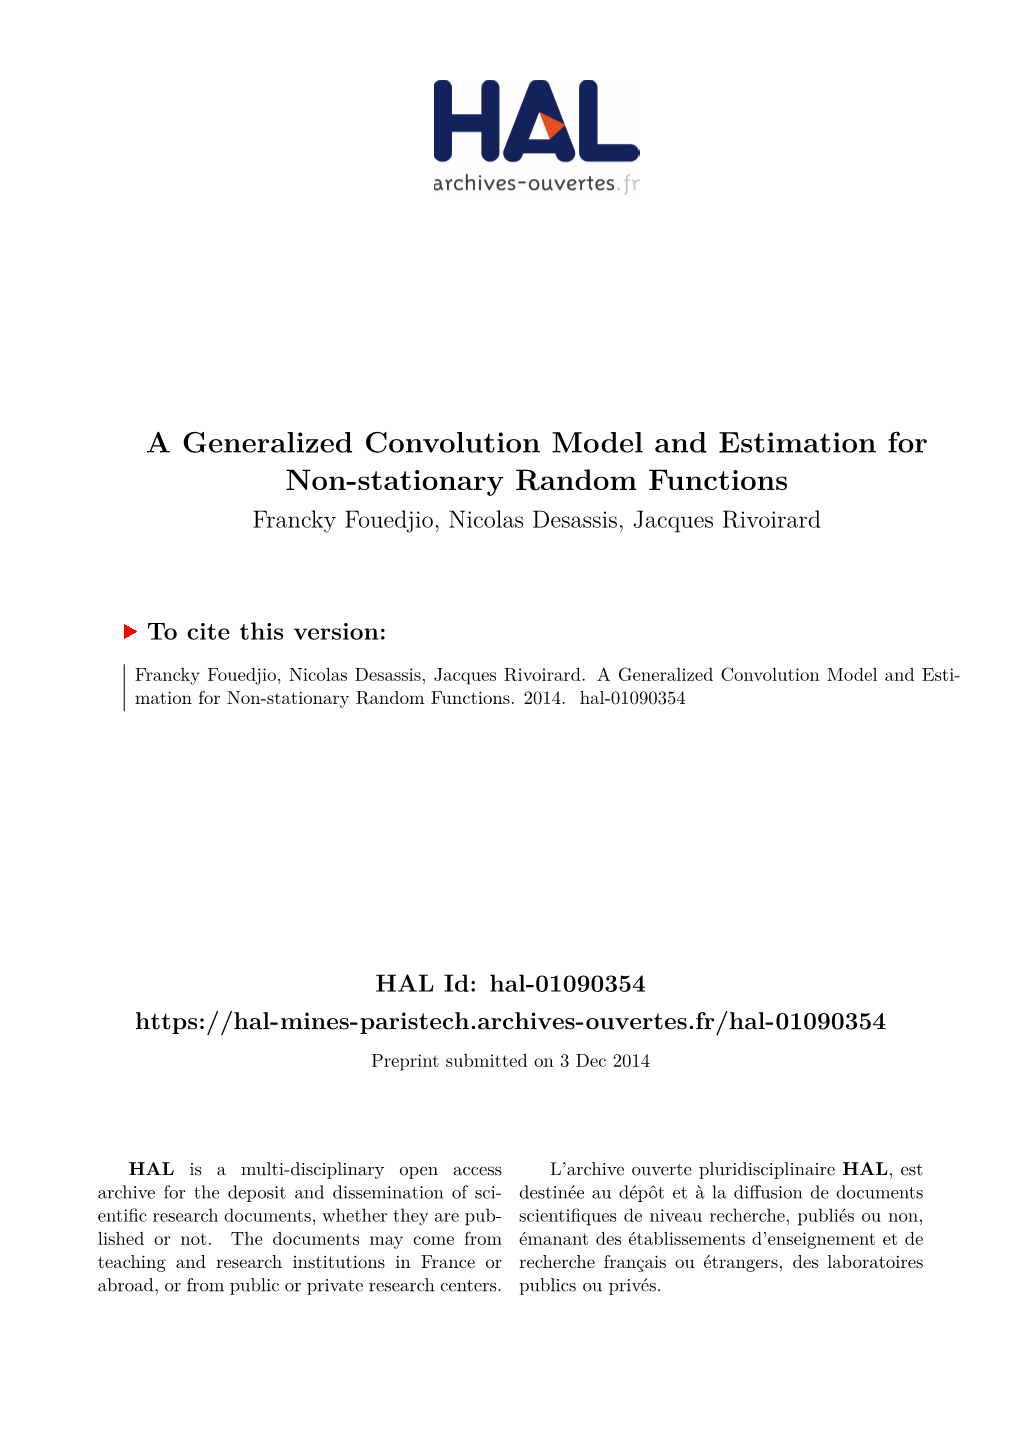 A Generalized Convolution Model and Estimation for Non-Stationary Random Functions Francky Fouedjio, Nicolas Desassis, Jacques Rivoirard